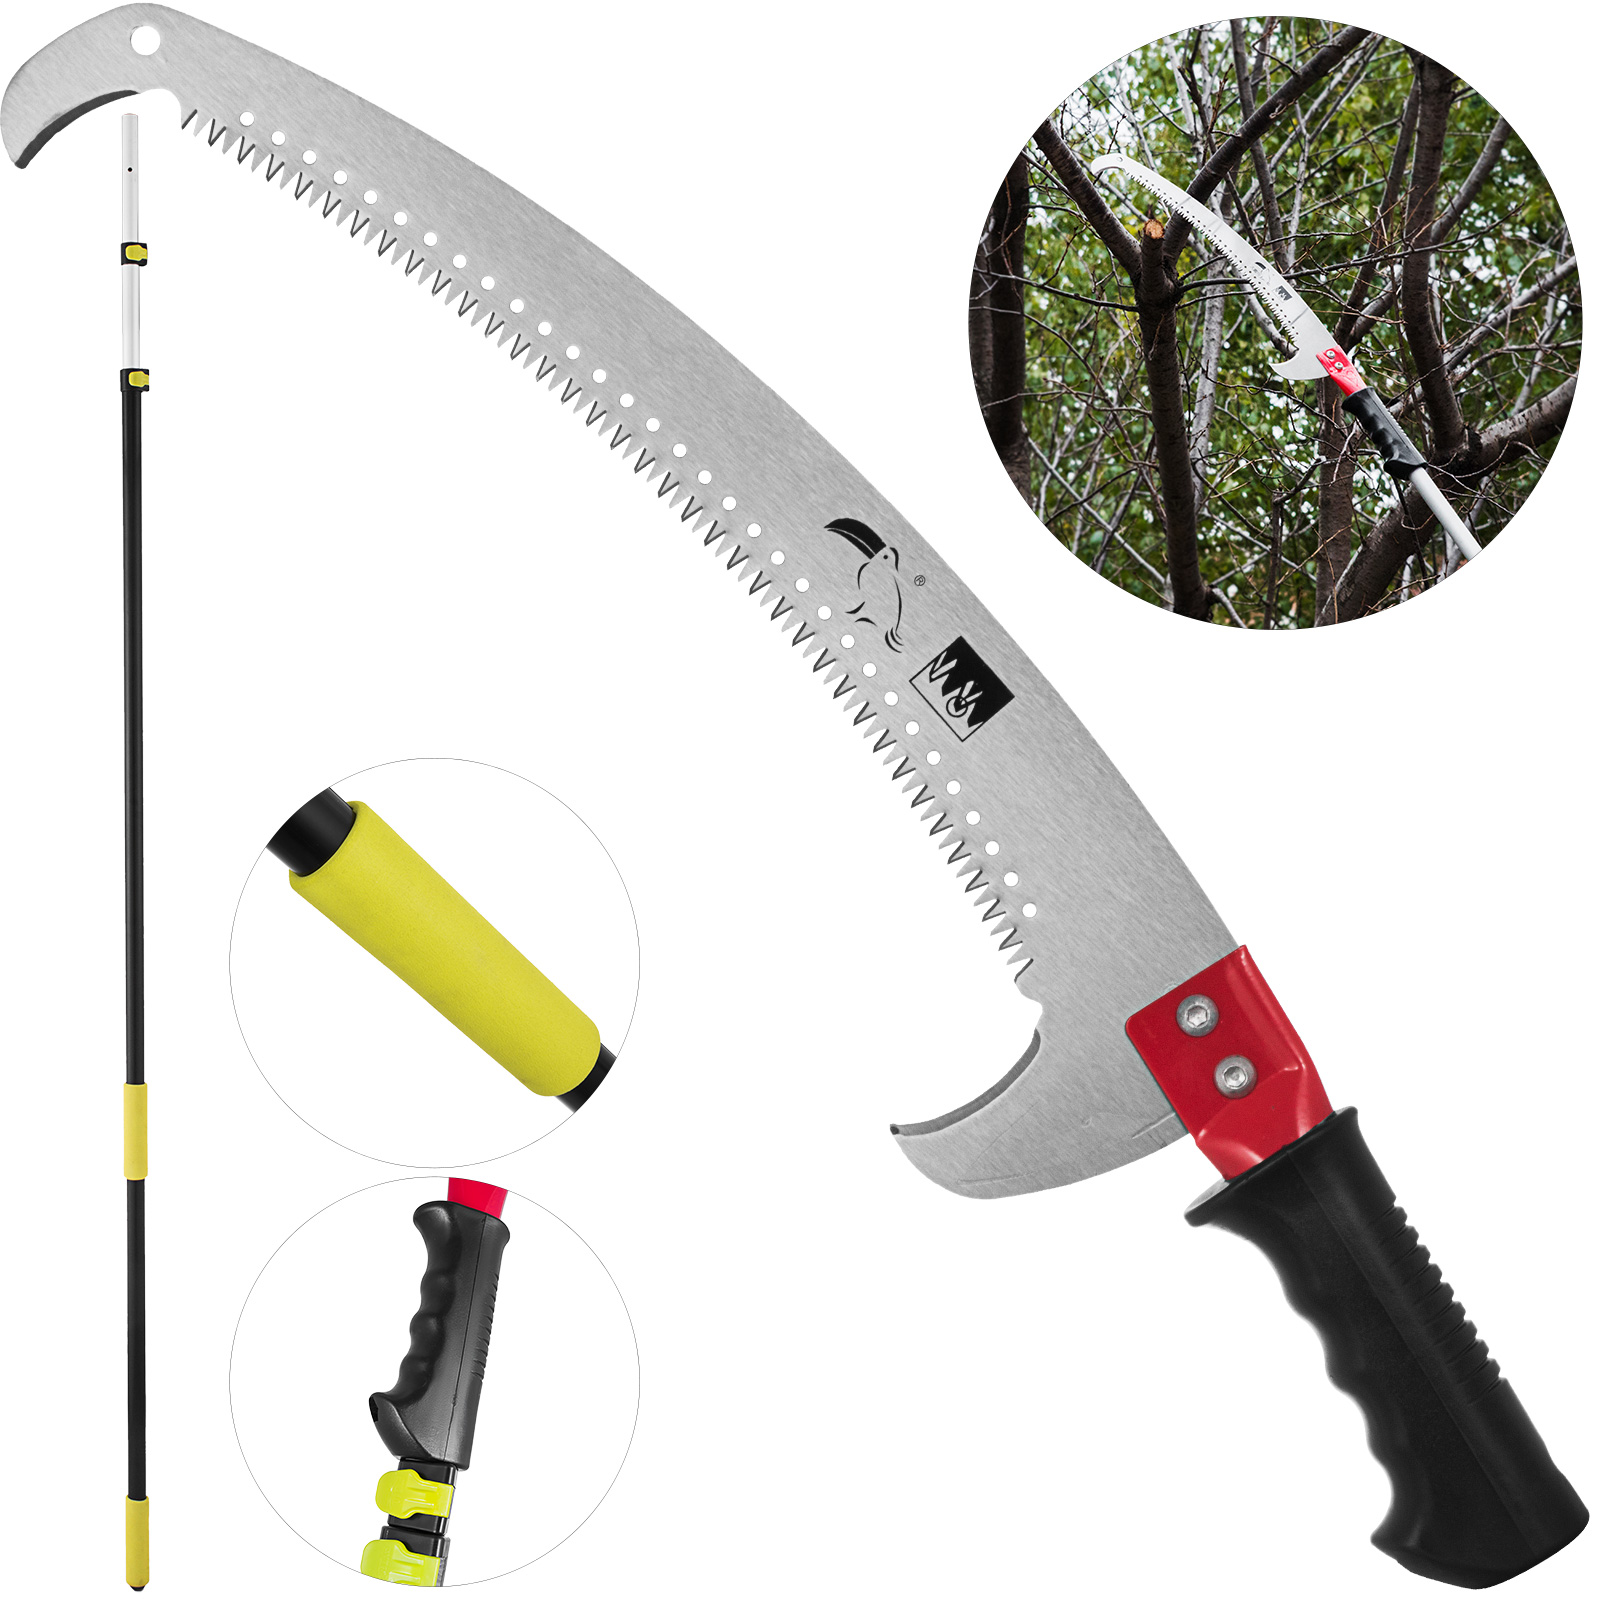 26ft Pole Saw Tree Pruner Trimming Package Set Extension Pole Cut Tree Branch US 